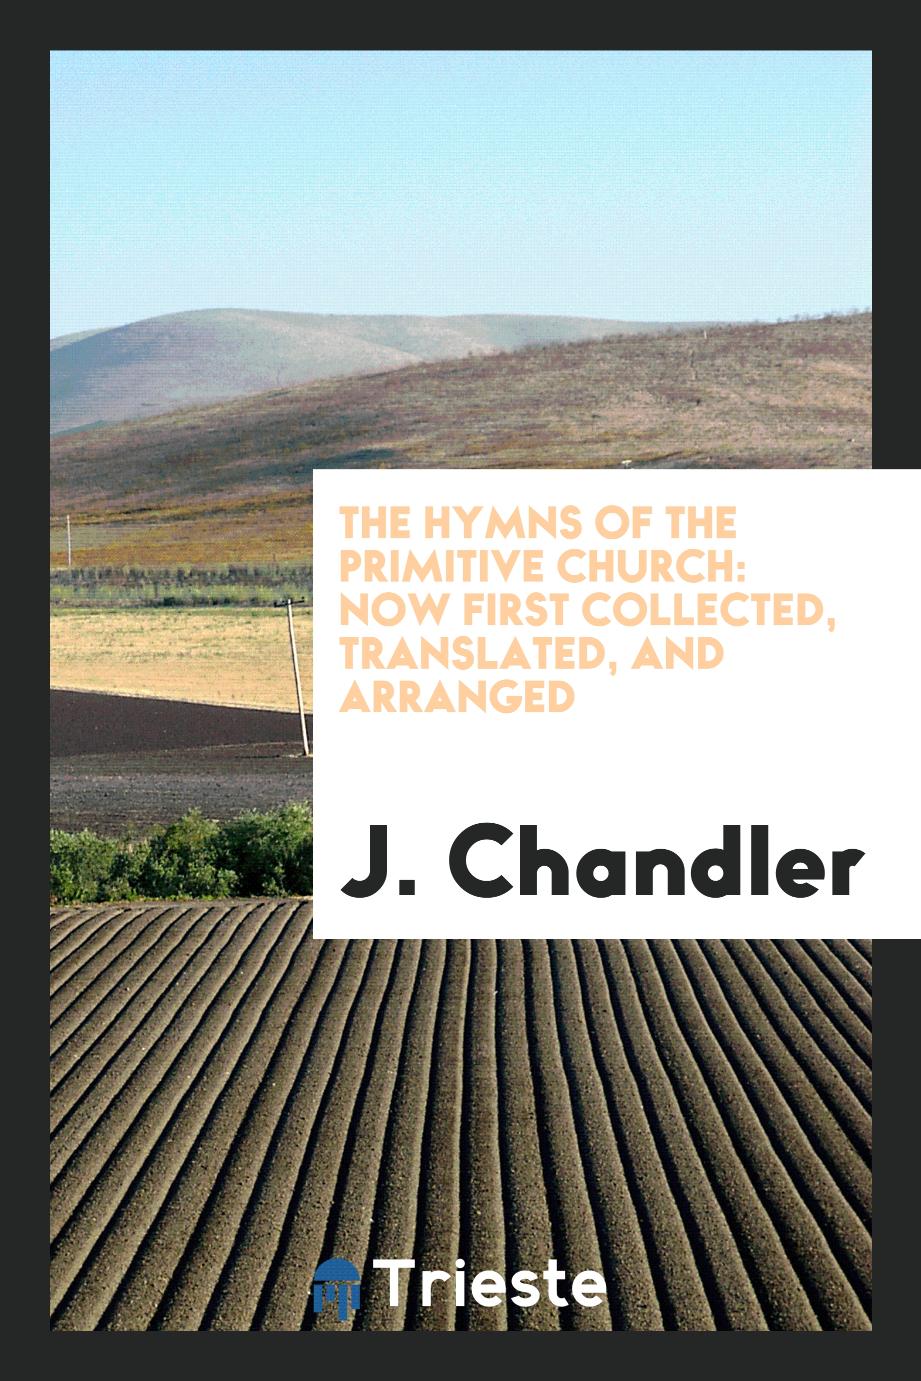 The Hymns of the Primitive Church: Now First Collected, Translated, and Arranged